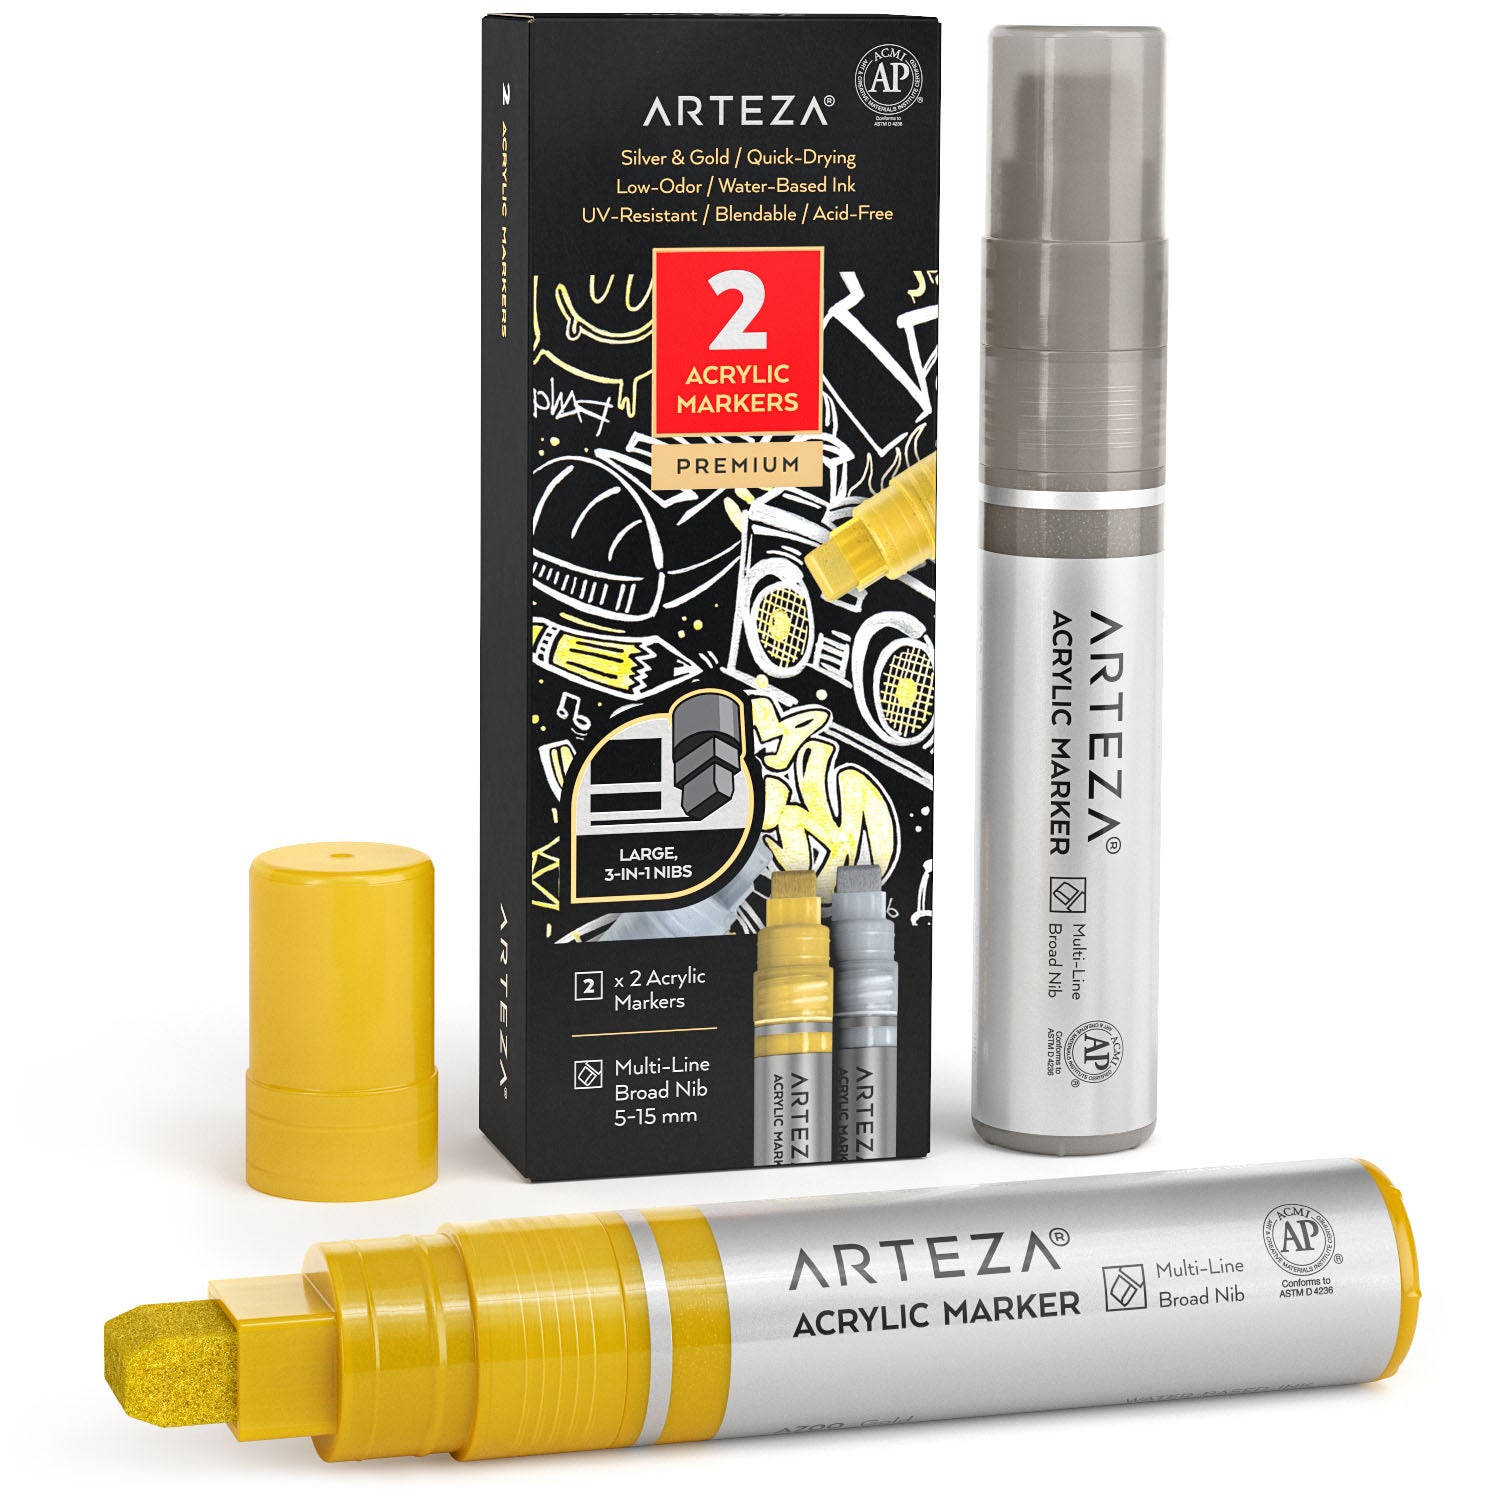  ARTEZA Acrylic Paint Markers, Pack of 3, A700 Gold, 2